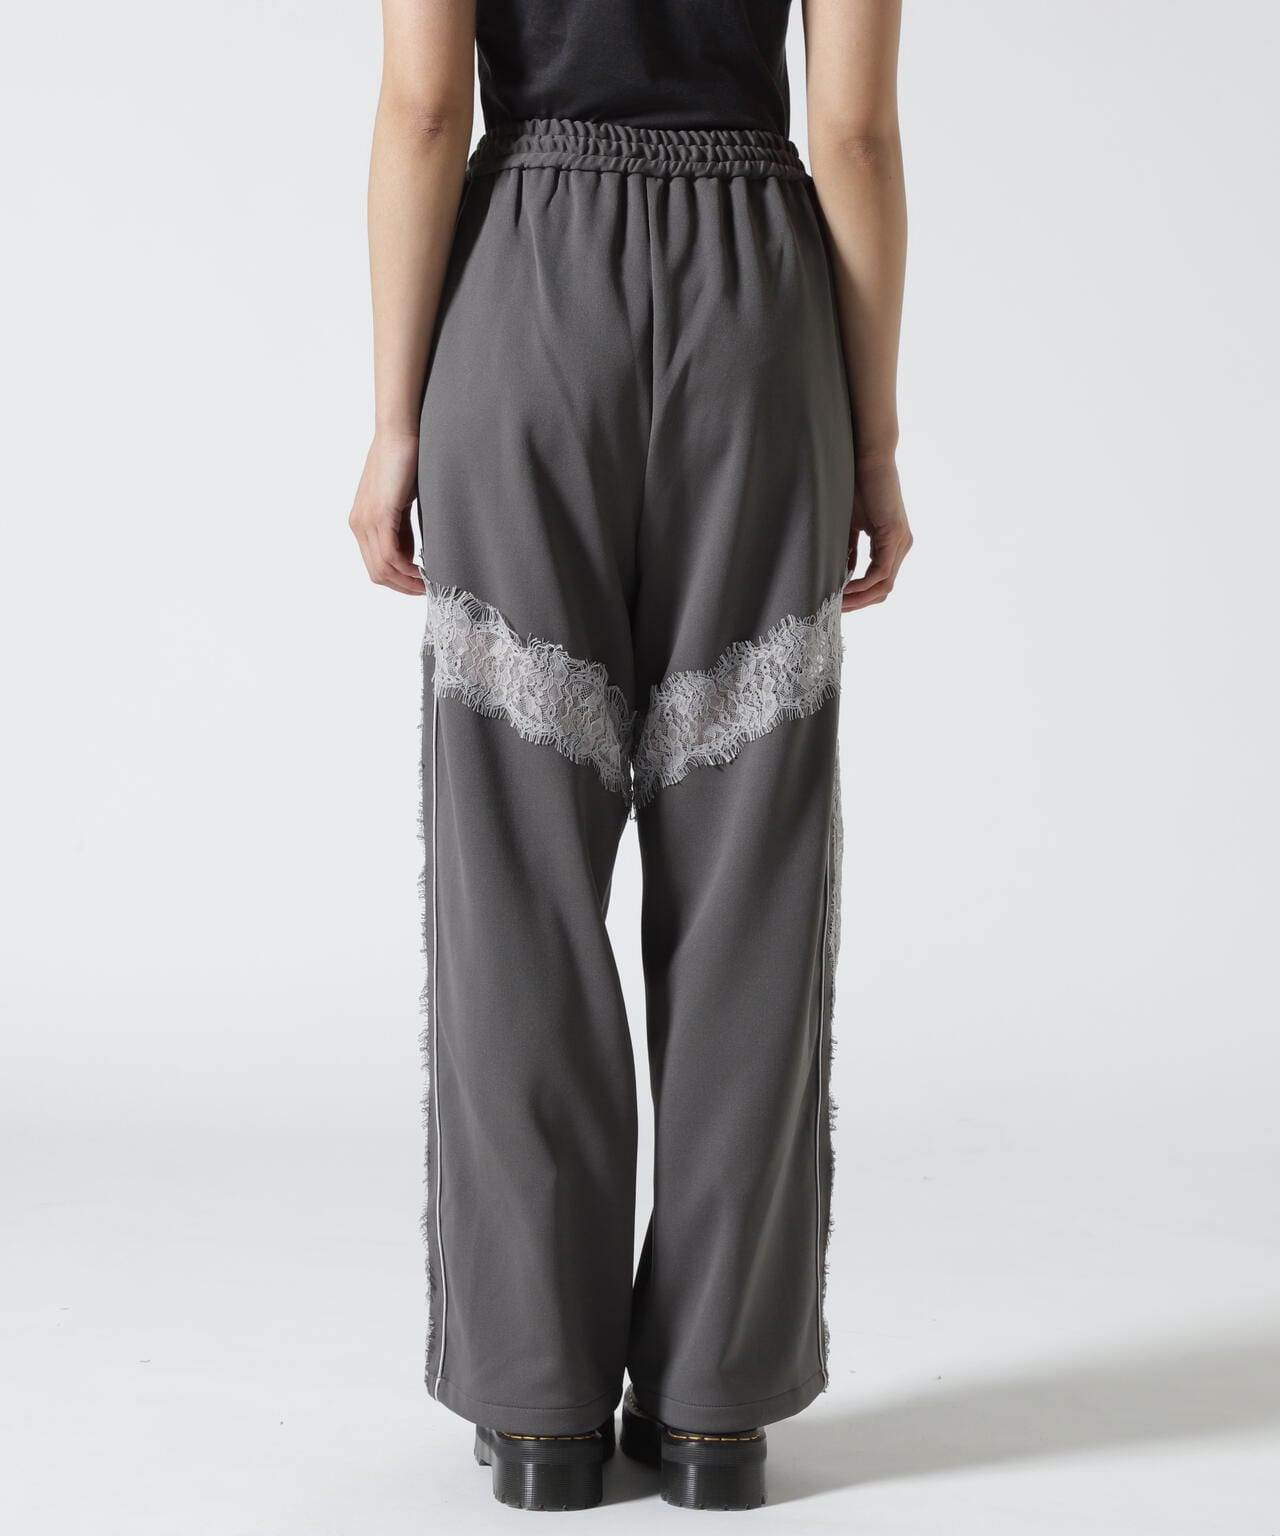 MAISON SPECIAL/メゾンスペシャル/Lace Docking Jersey Pants | ROYAL ...